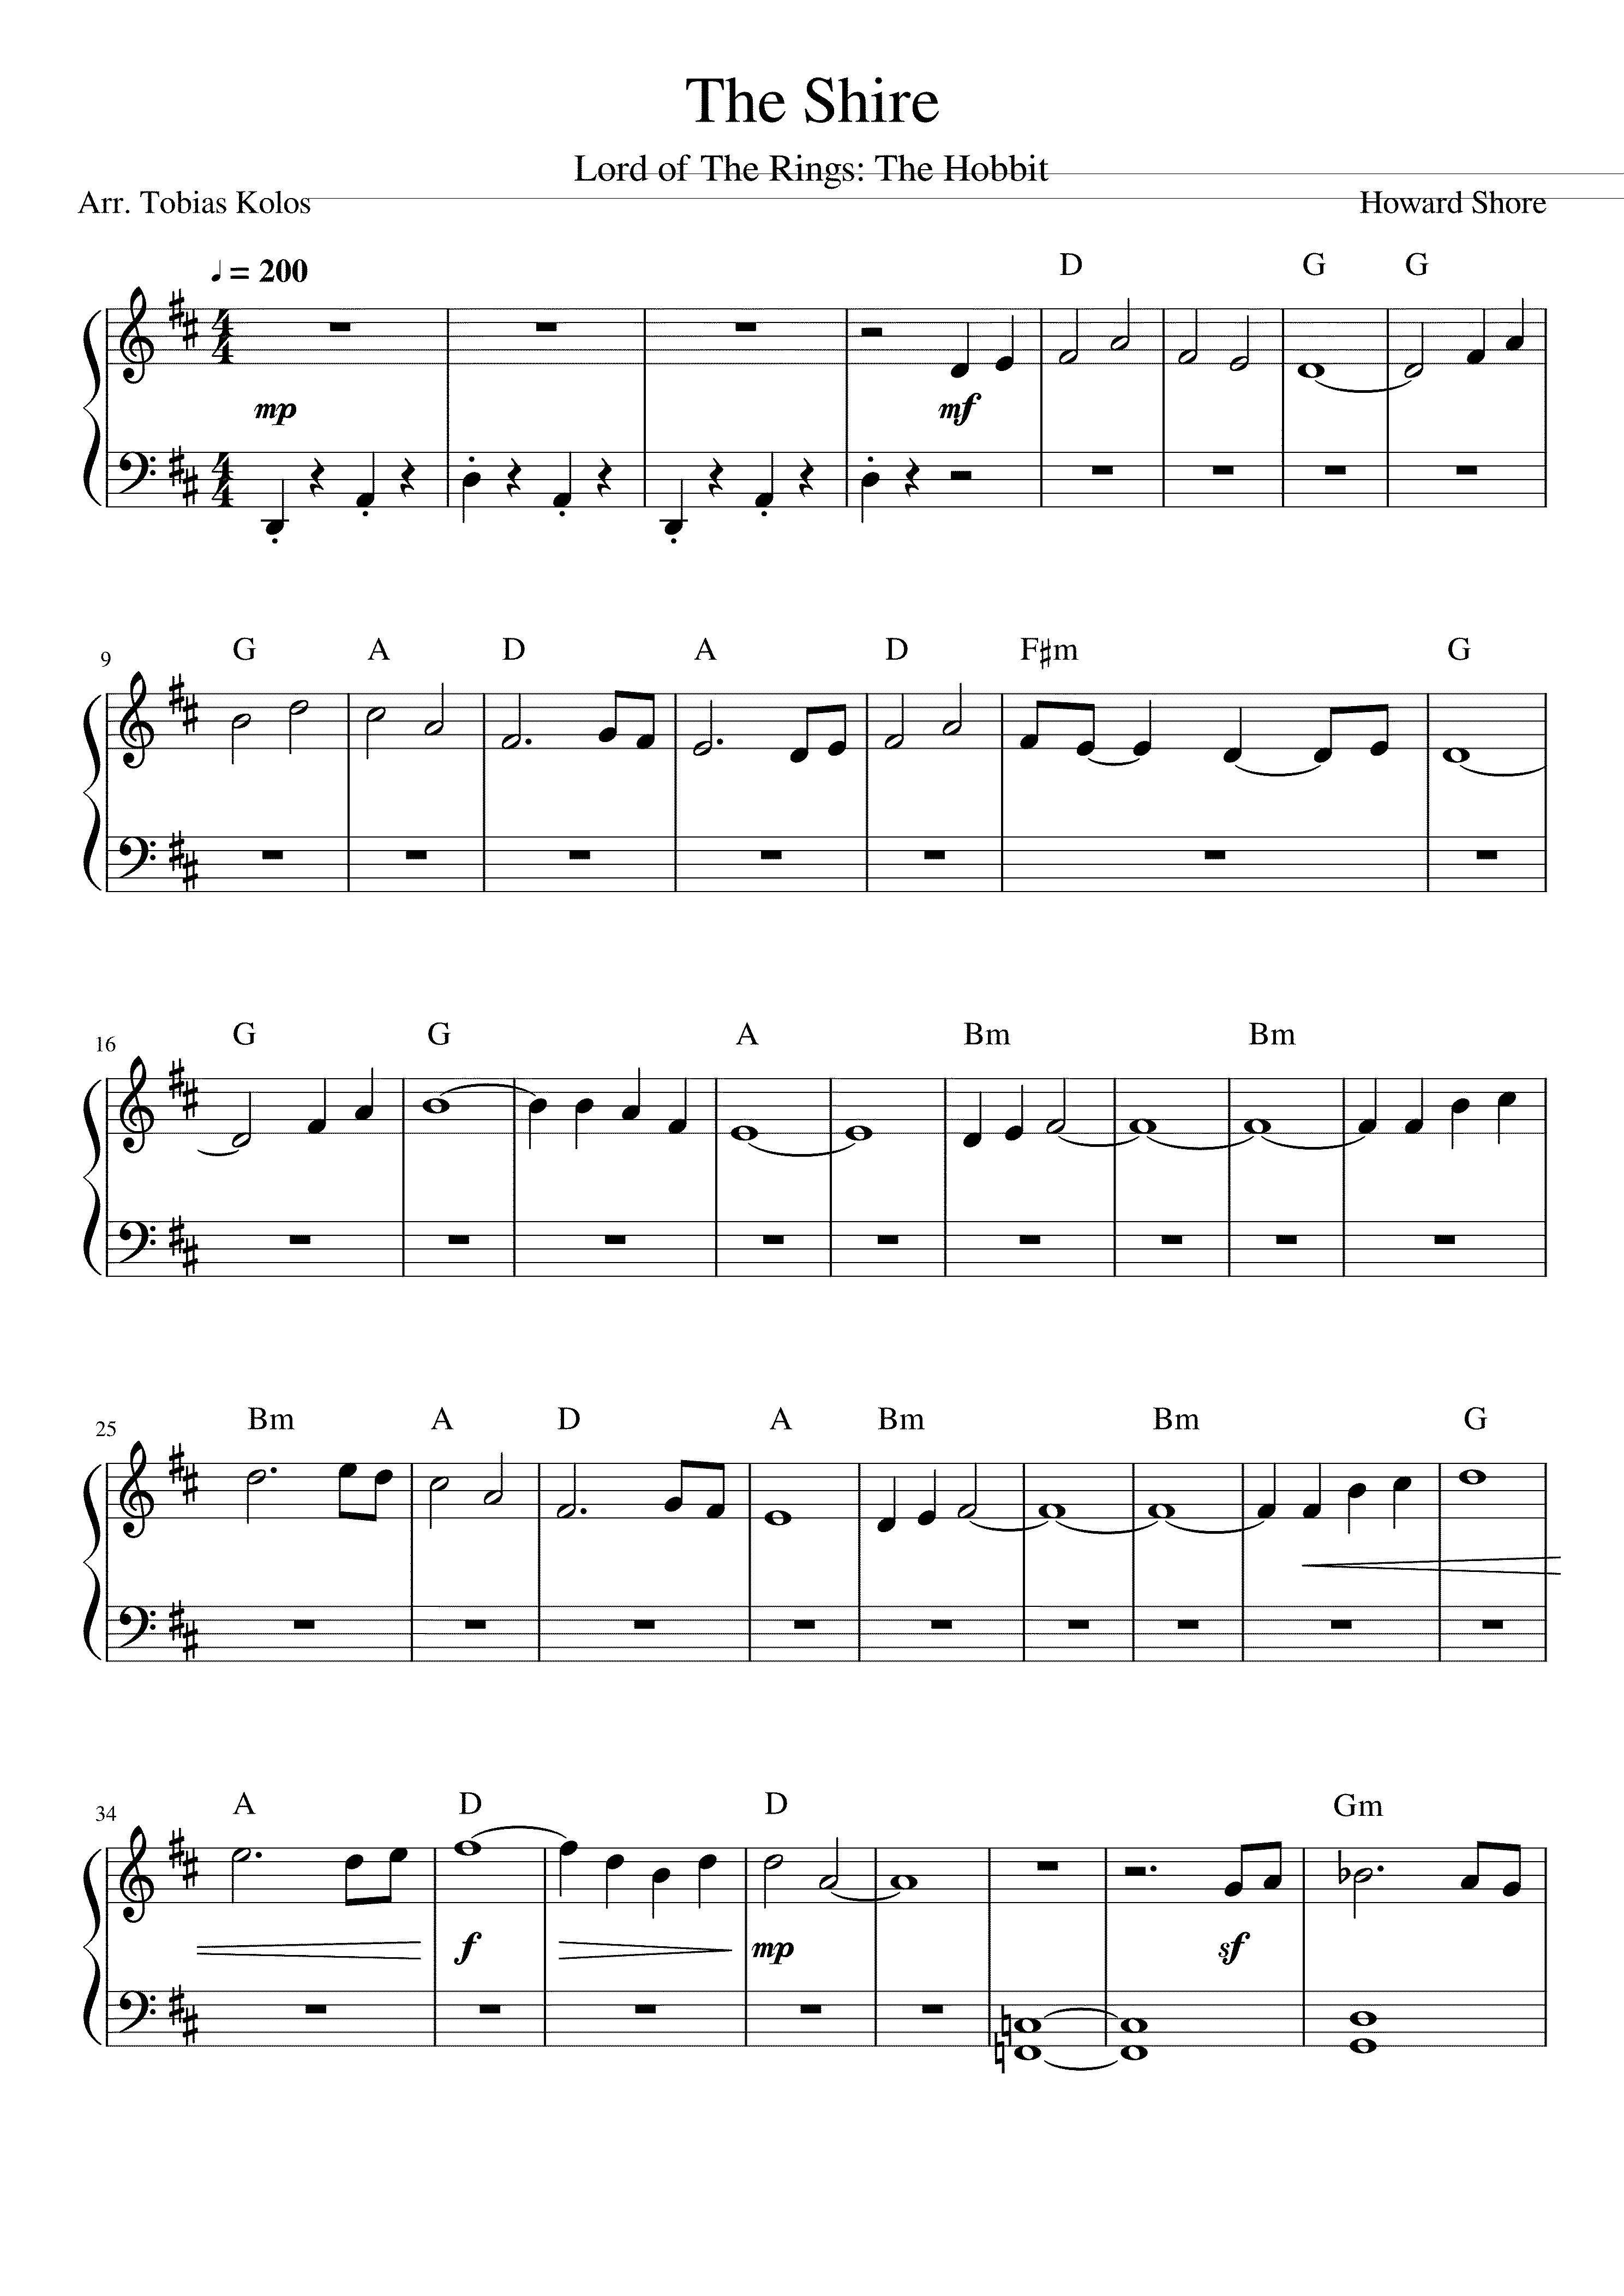 Partitura Lord of The Rings Theme